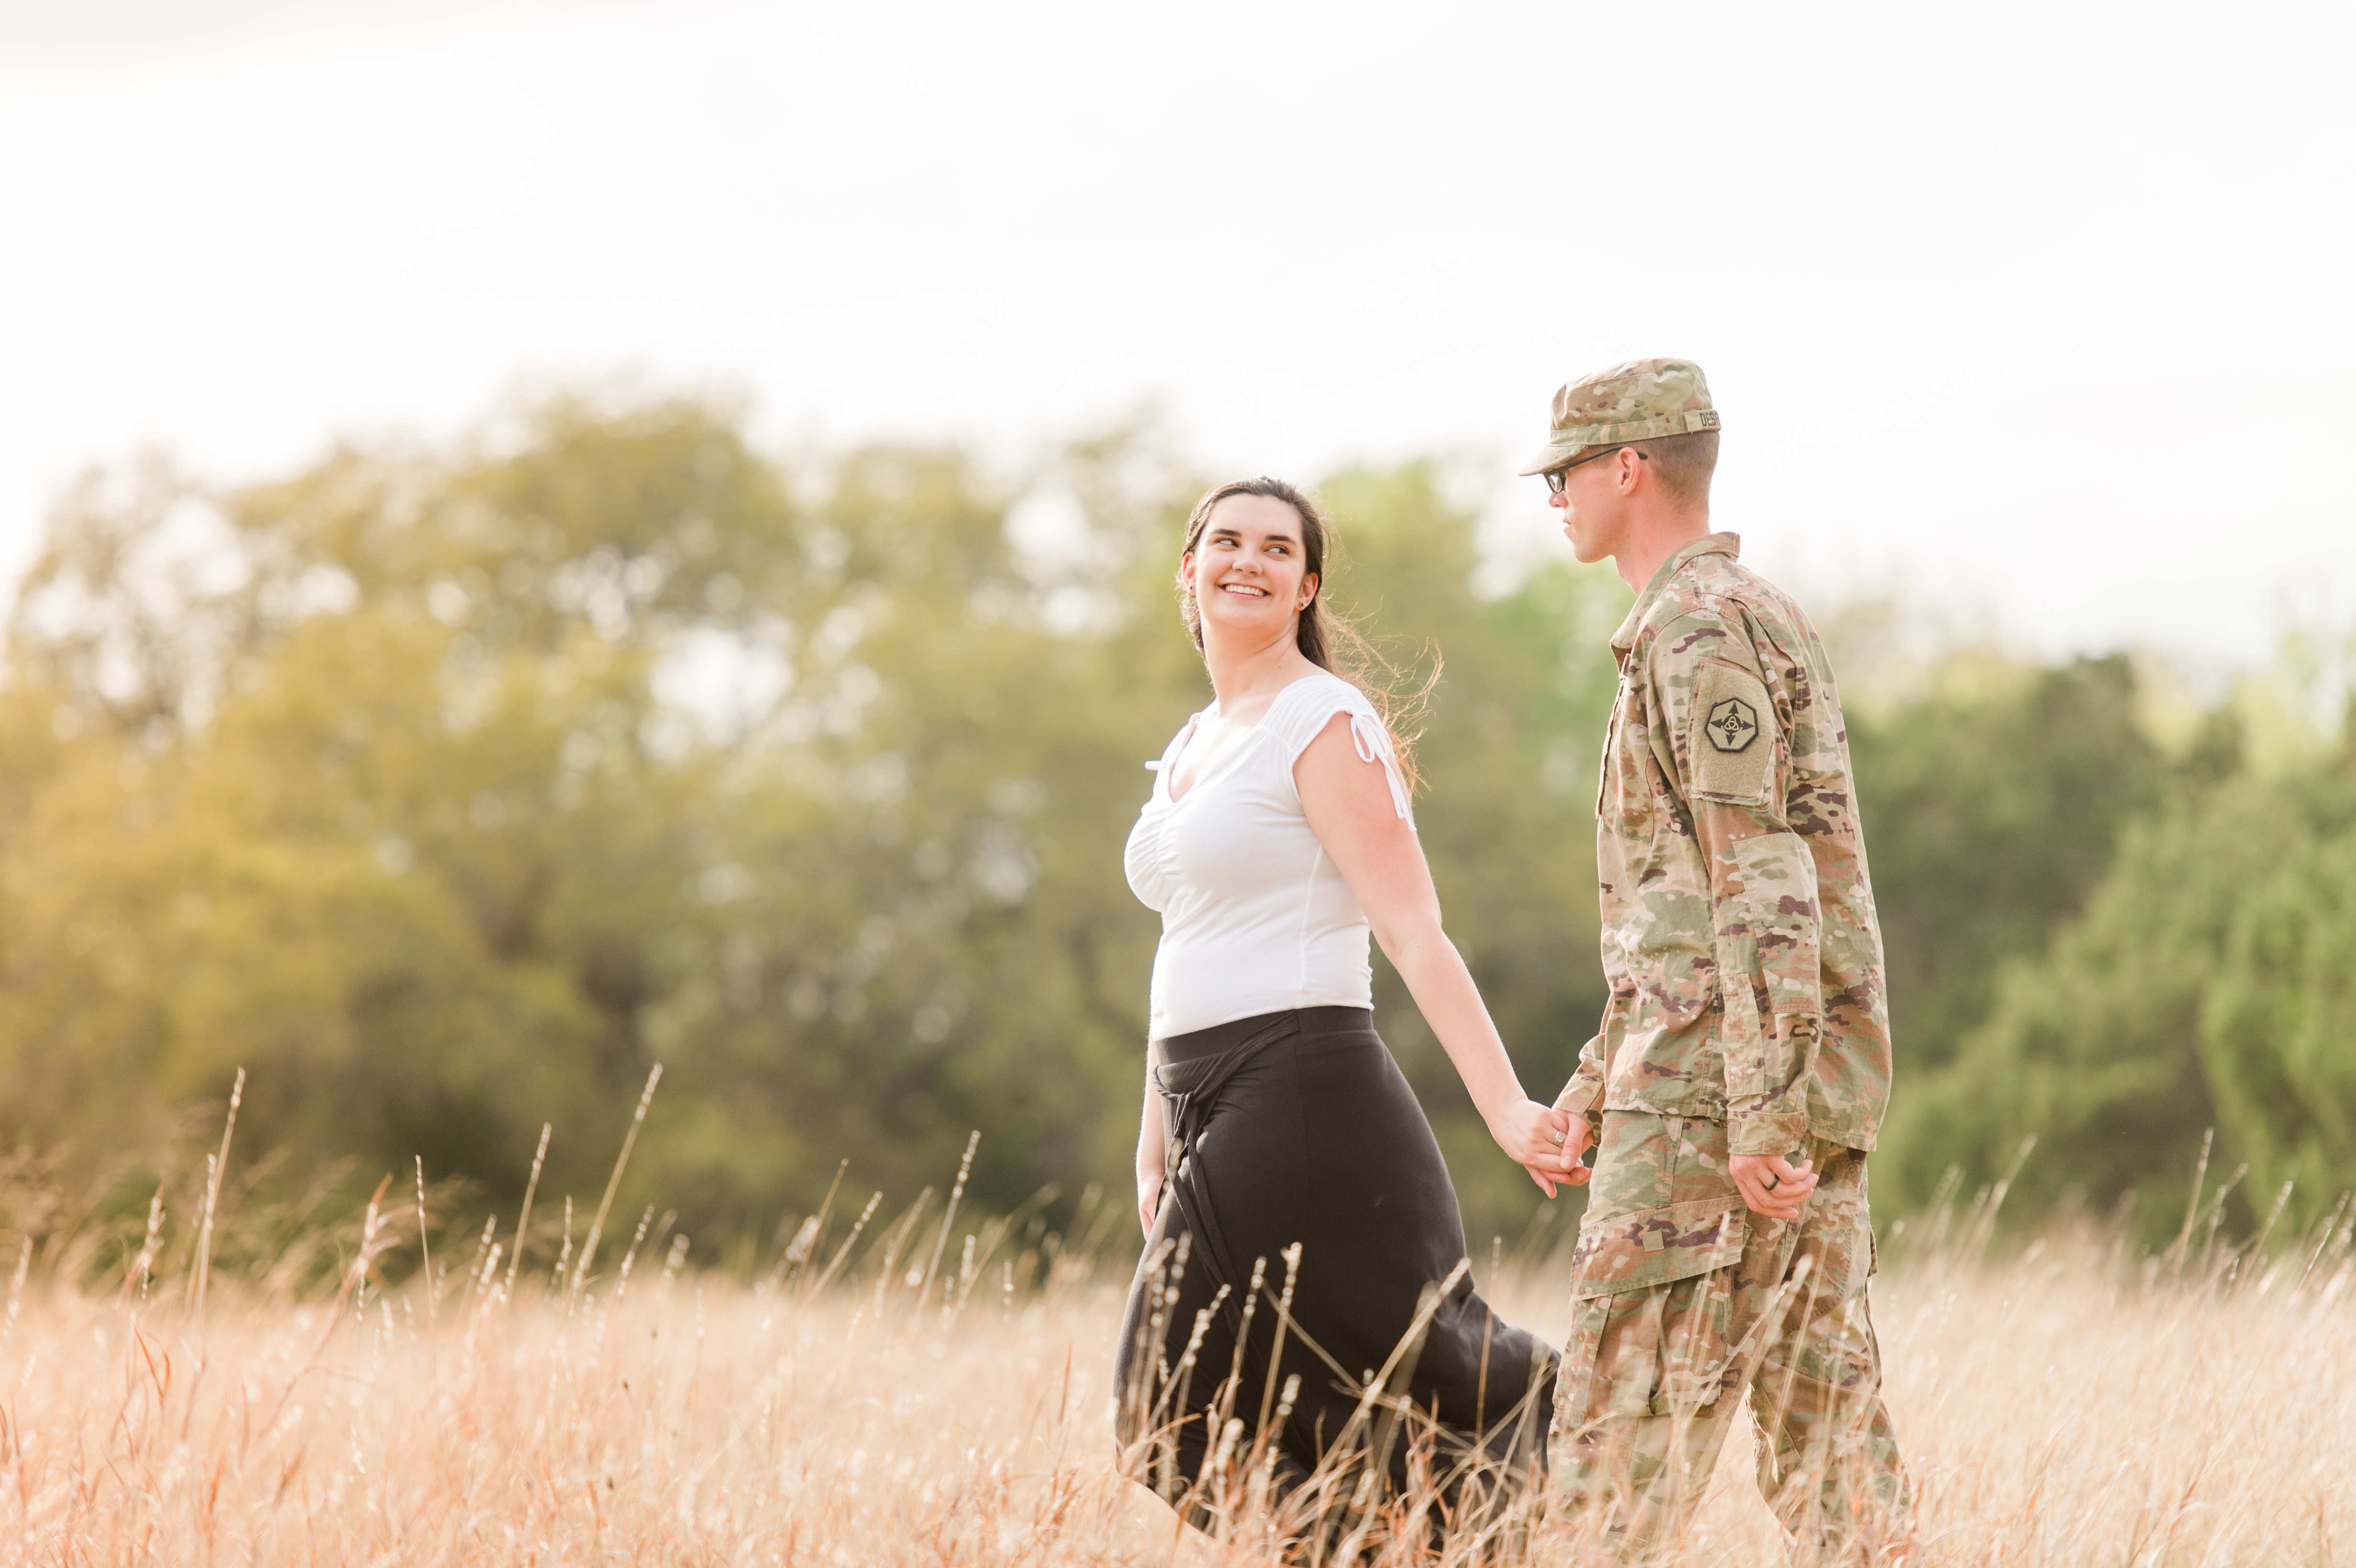 The military couple walks and looks up at each other lovingly.